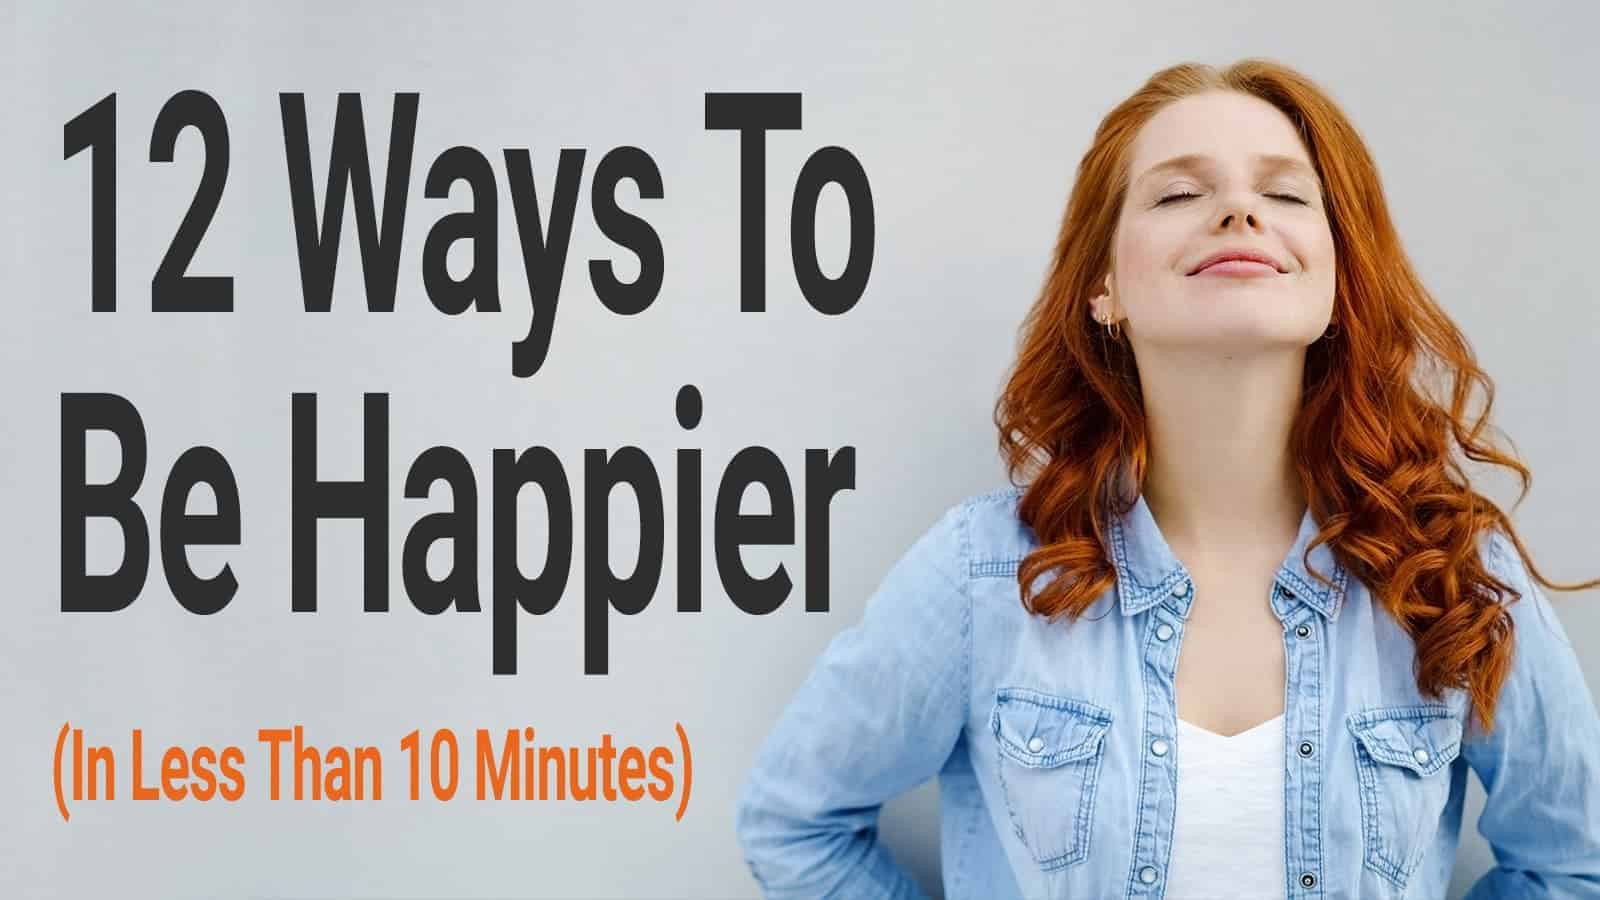 12 Ways To Be Happier (In Less Than 10 Minutes)